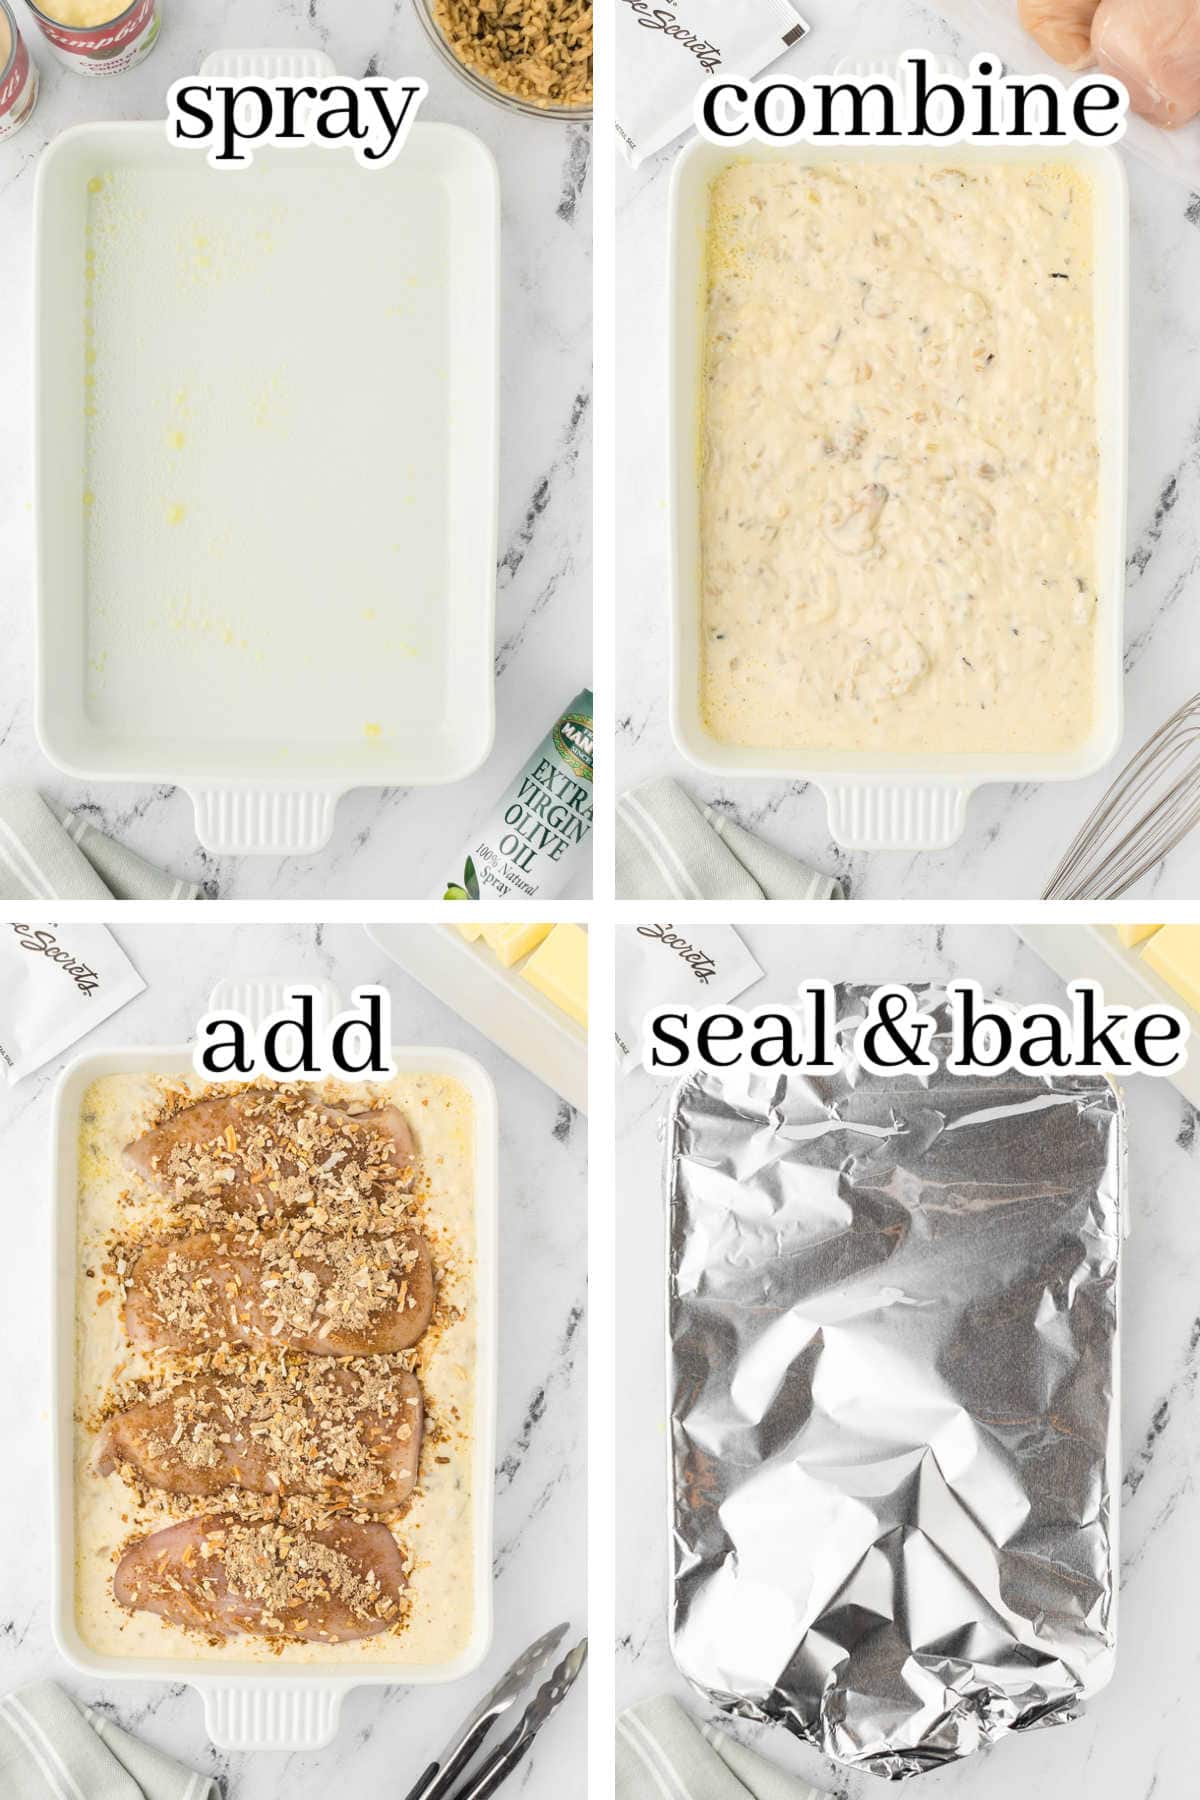 Step-by-step instructions to make casserole recipe, with print overlay.